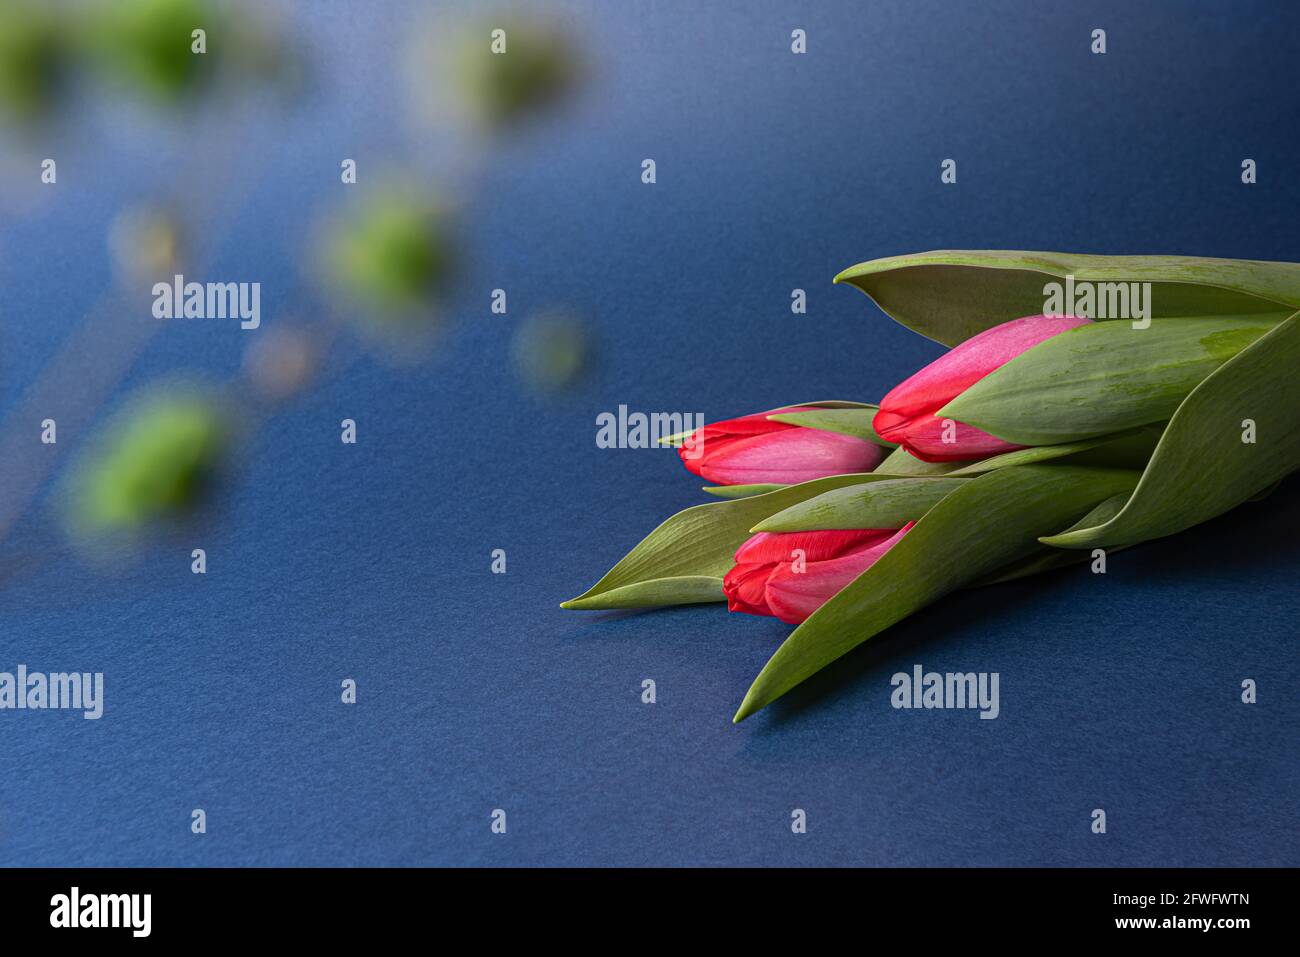 Red tulips with green leaves on dark blue paper surrounded by unfocused small green flowers. Seasonal background with spring flower bouquet and copy s Stock Photo